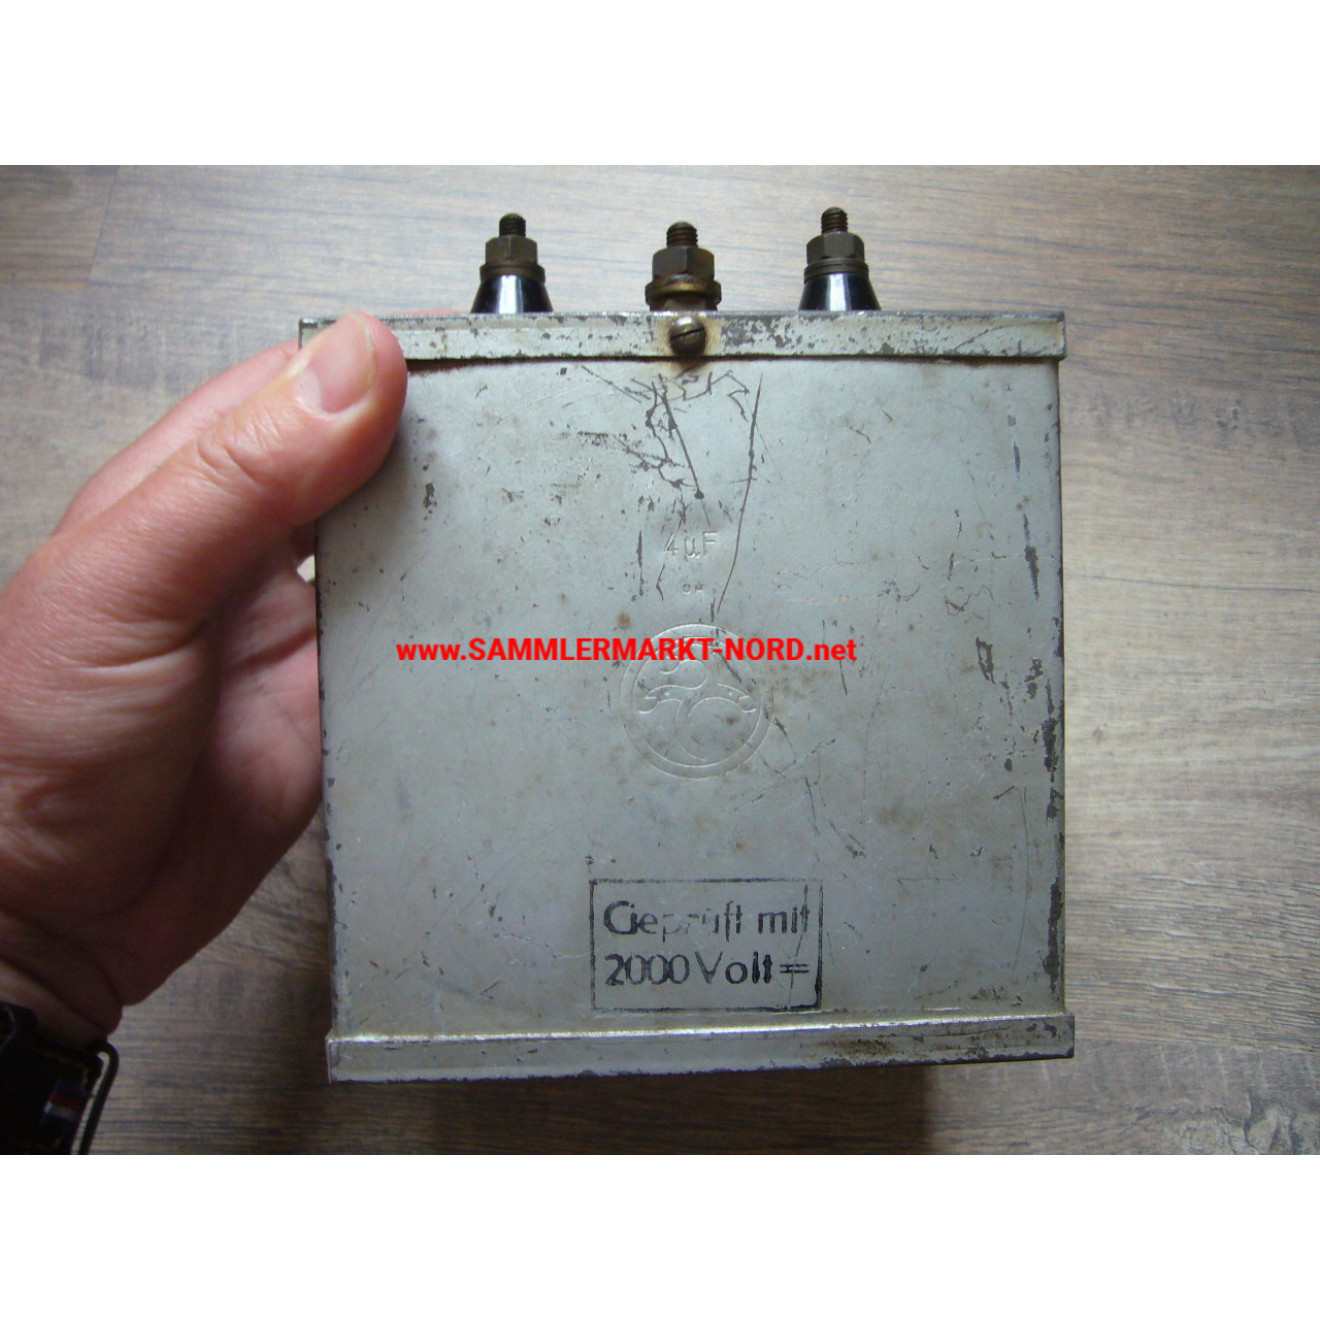 Wehrmacht - large capacitor - radio technology ?